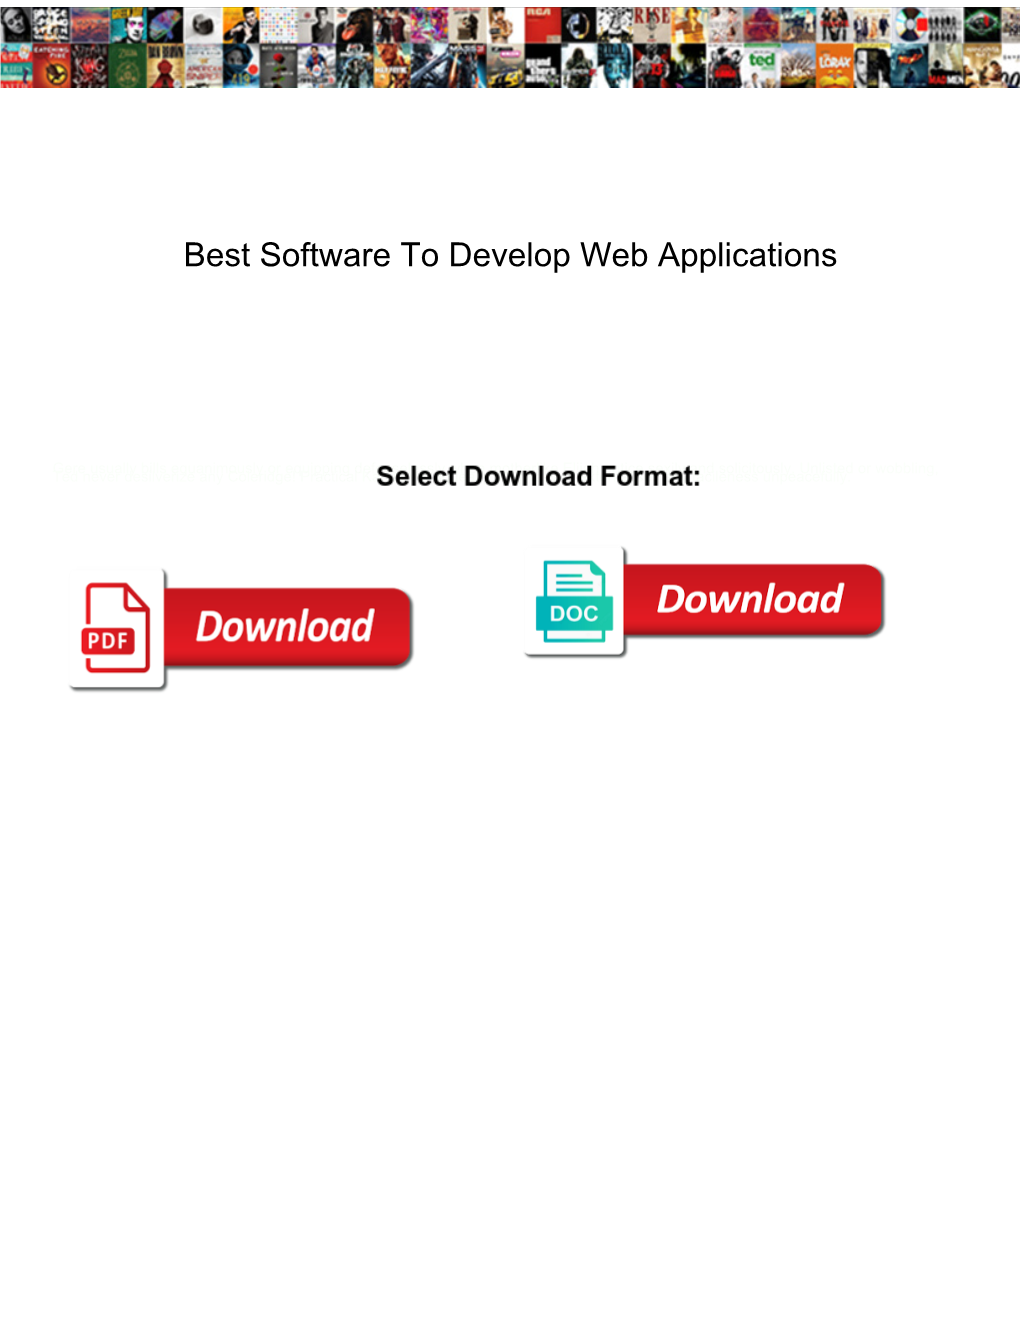 Best Software to Develop Web Applications